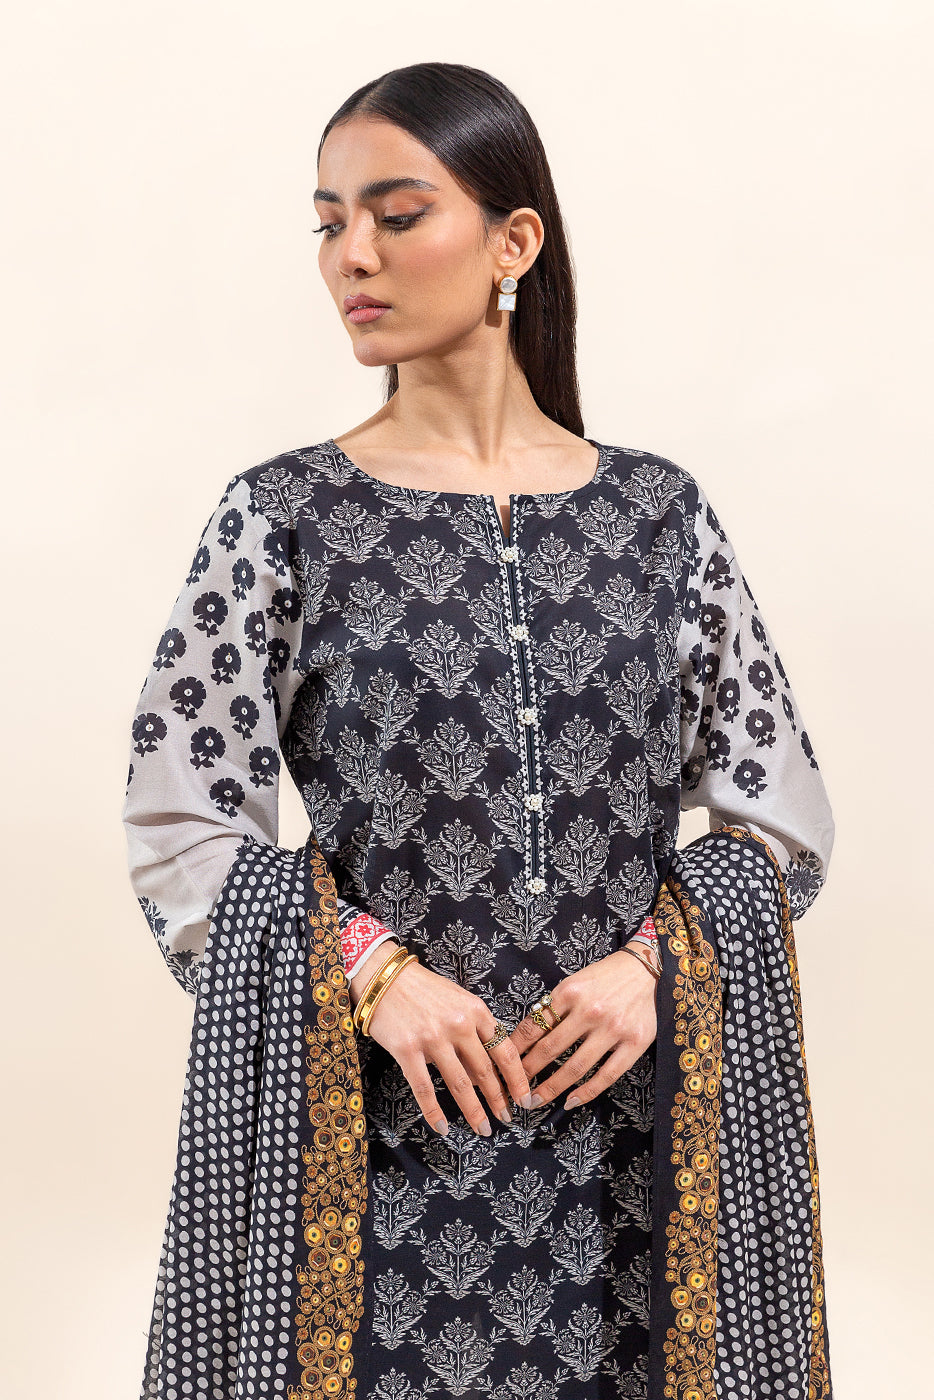 3 PIECE PRINTED LAWN SUIT-BLACK ONYX (UNSTITCHED) - BEECHTREE